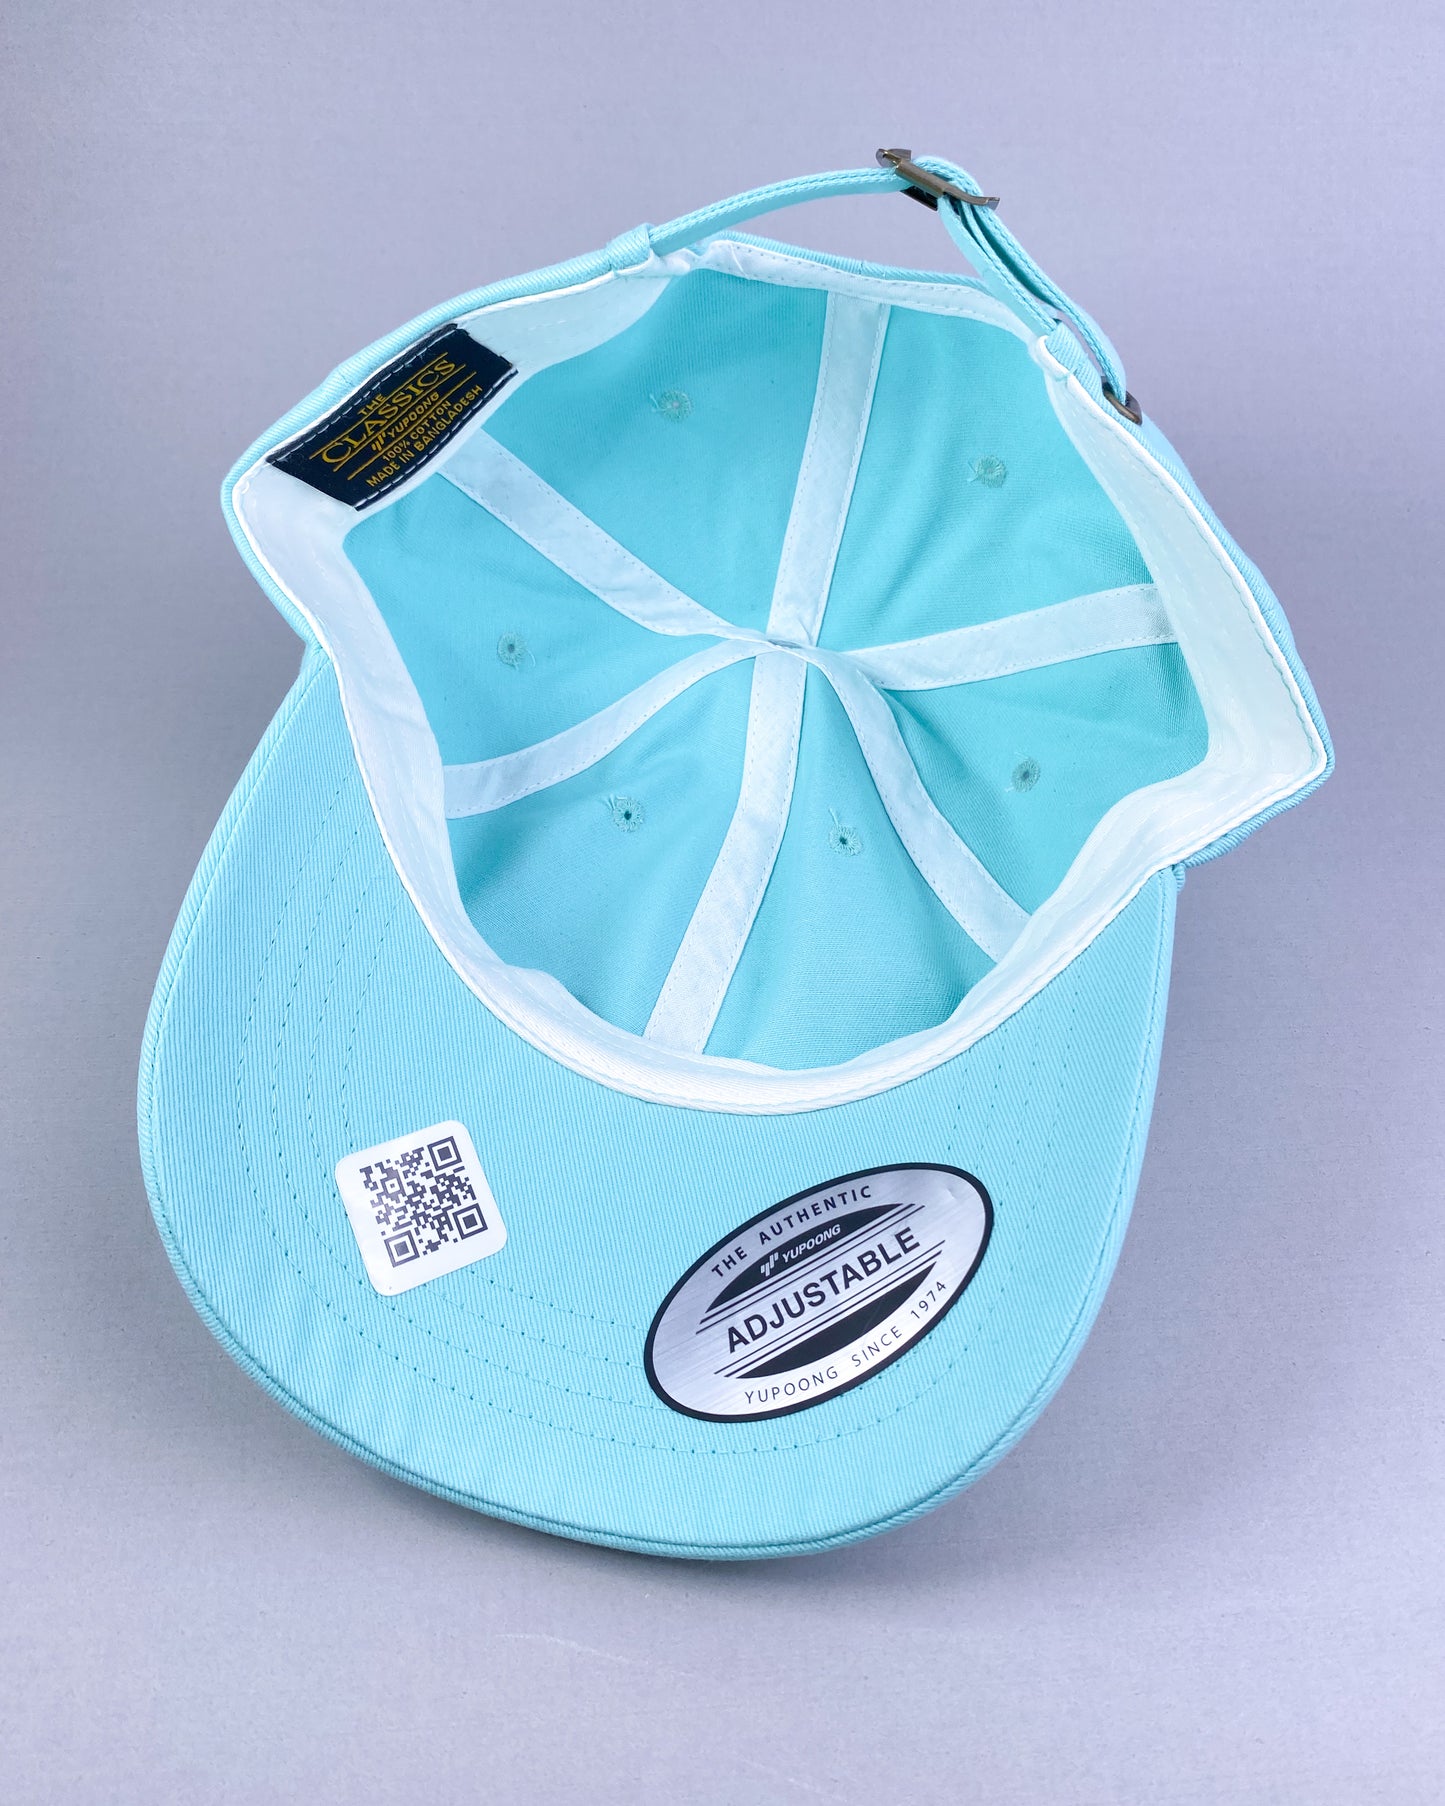 Bravo Premium hat in teal with marlin design leather patch